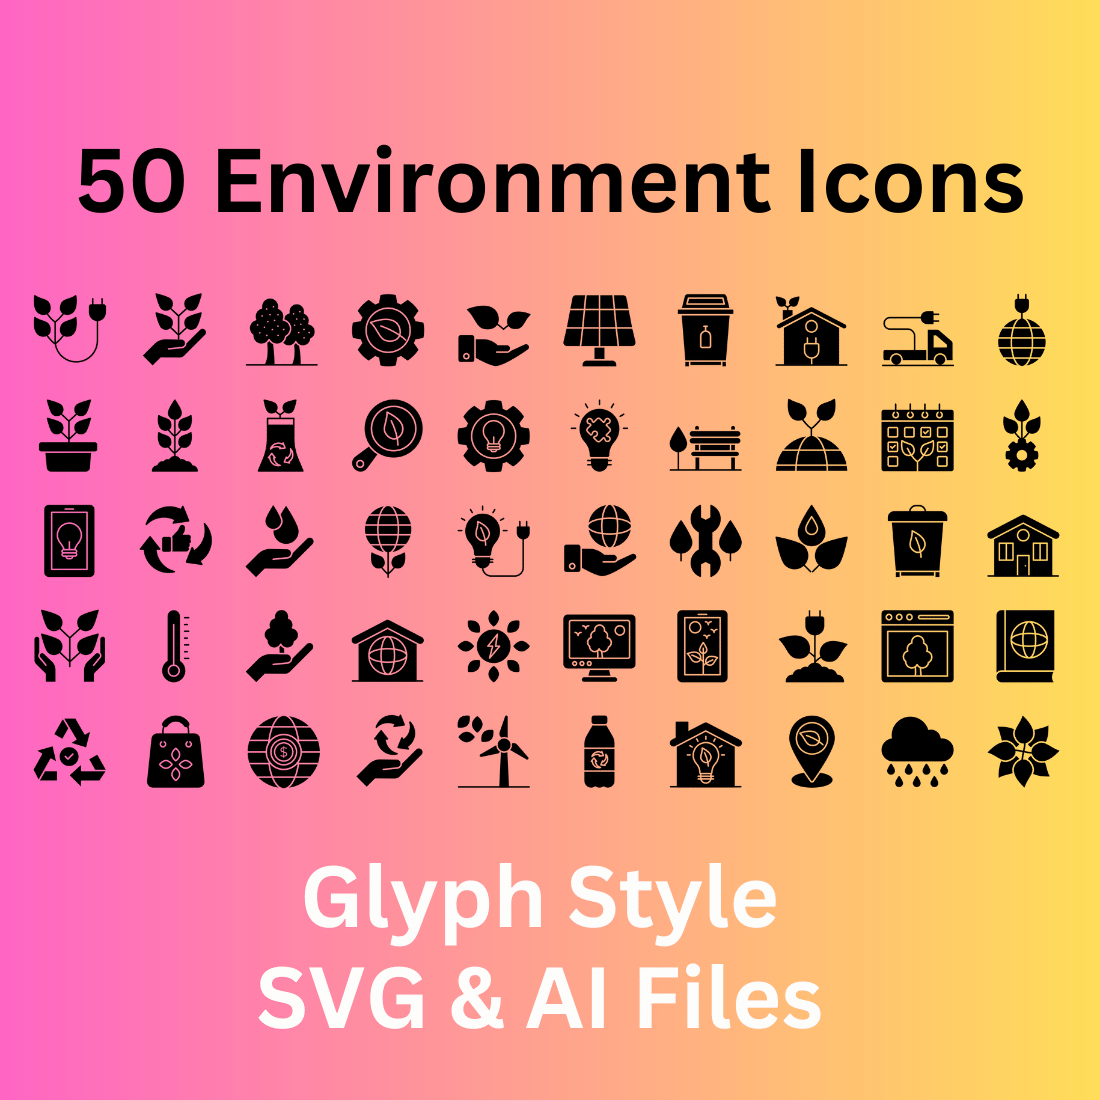 Environment Icon Set 50 Glyph Icons - SVG And AI Files cover image.